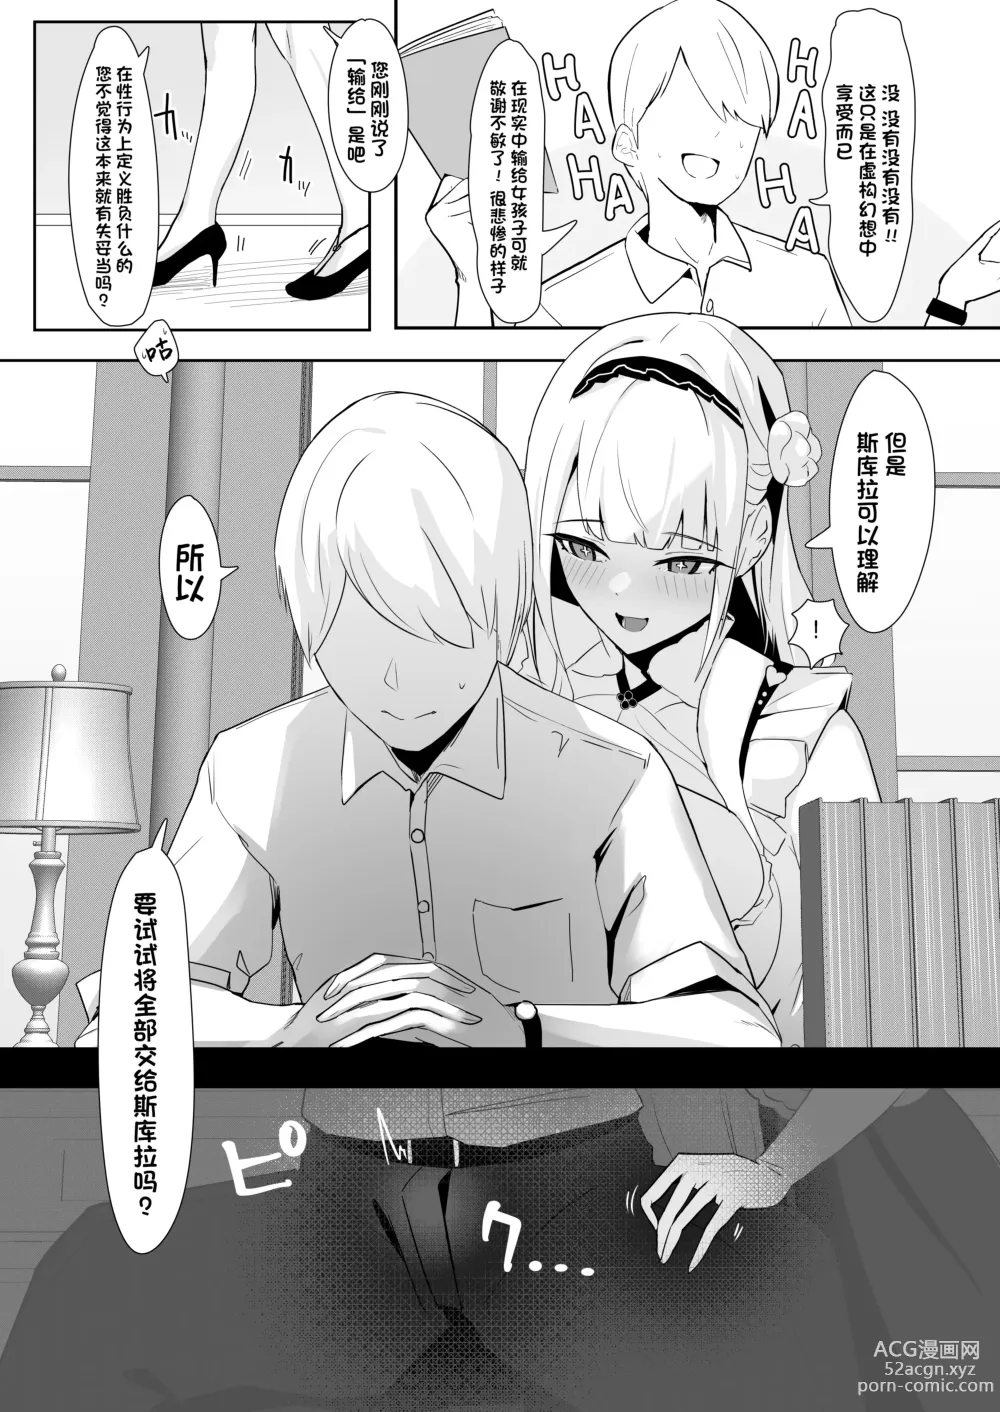 Page 4 of doujinshi 献给你的无上之宝